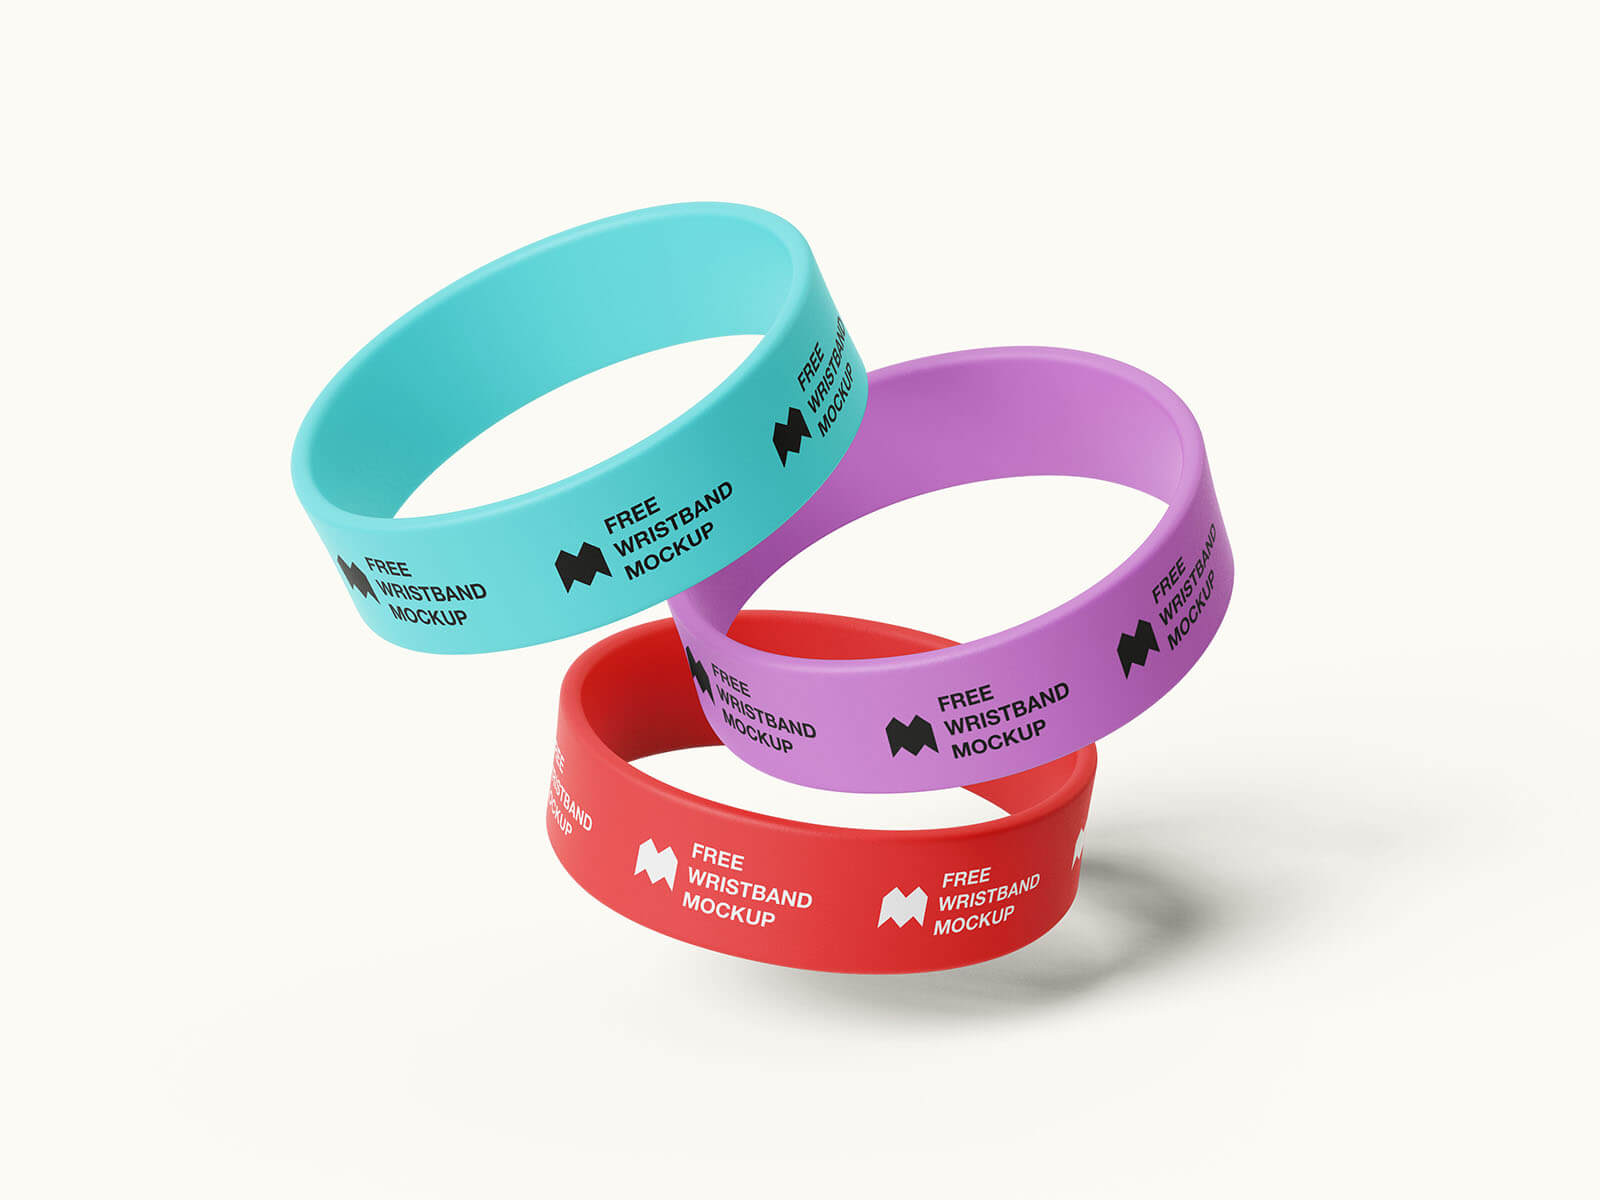 6 Free Wide Silicone Wristbands / Rubber Bracelet Mockup PSD Files